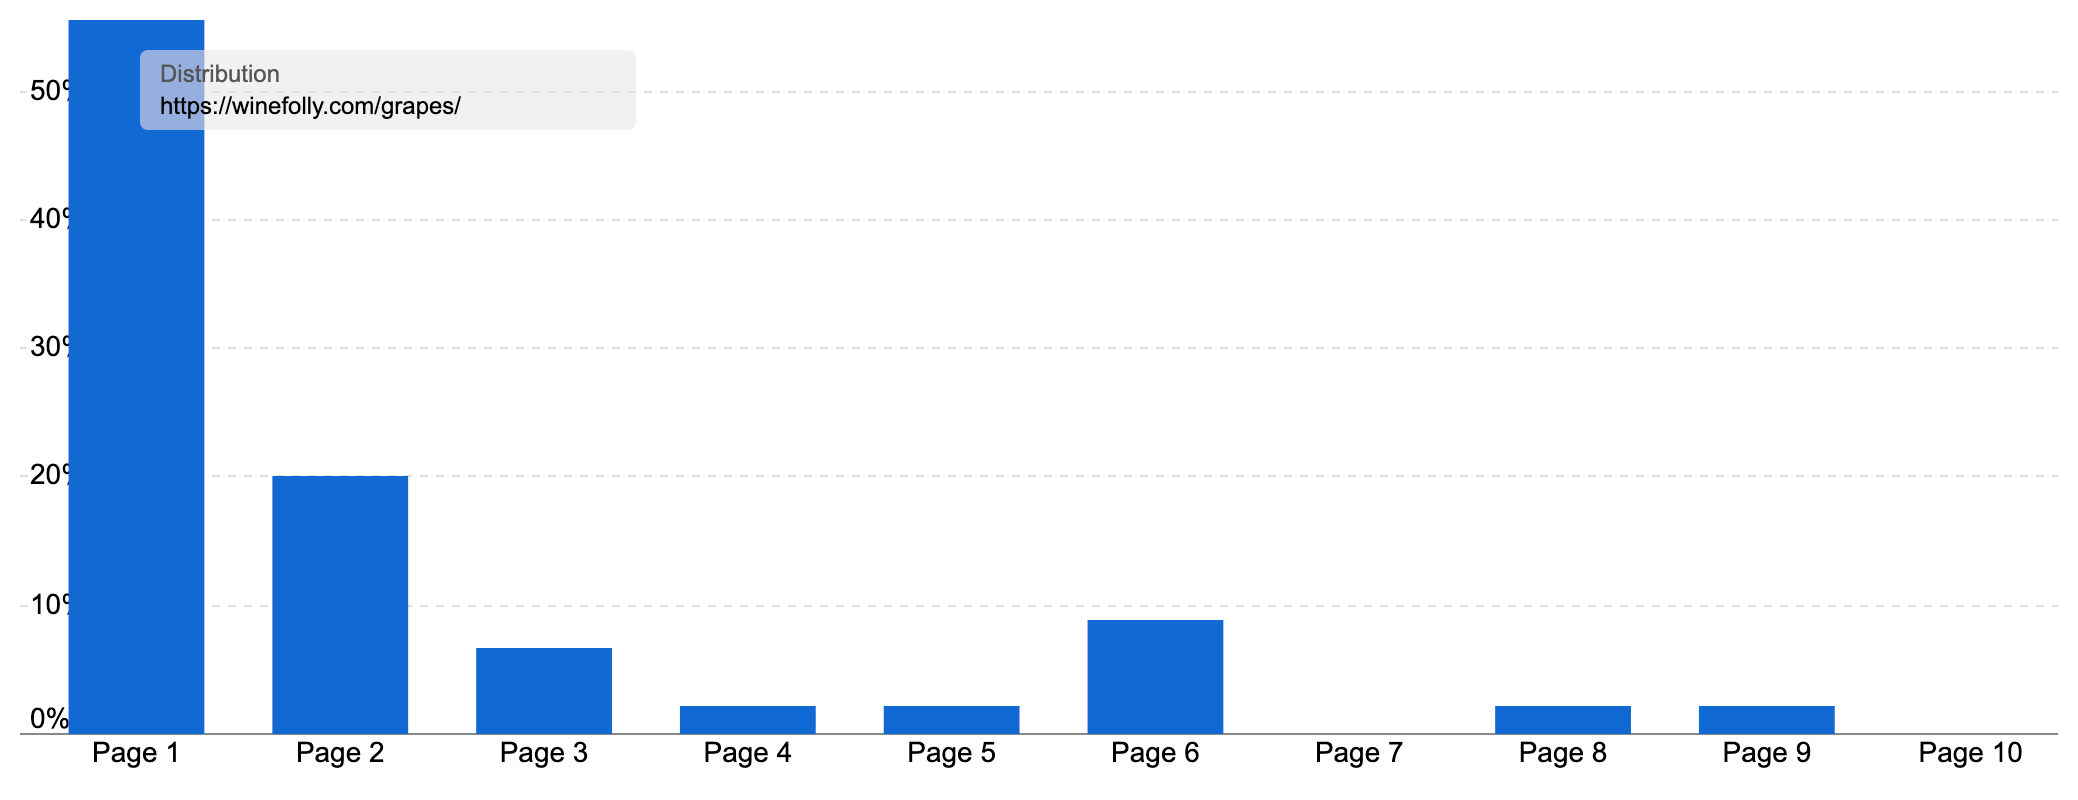 Graph showing the large majority of pages from the /grapes/ directory by Wine Folly on page one.